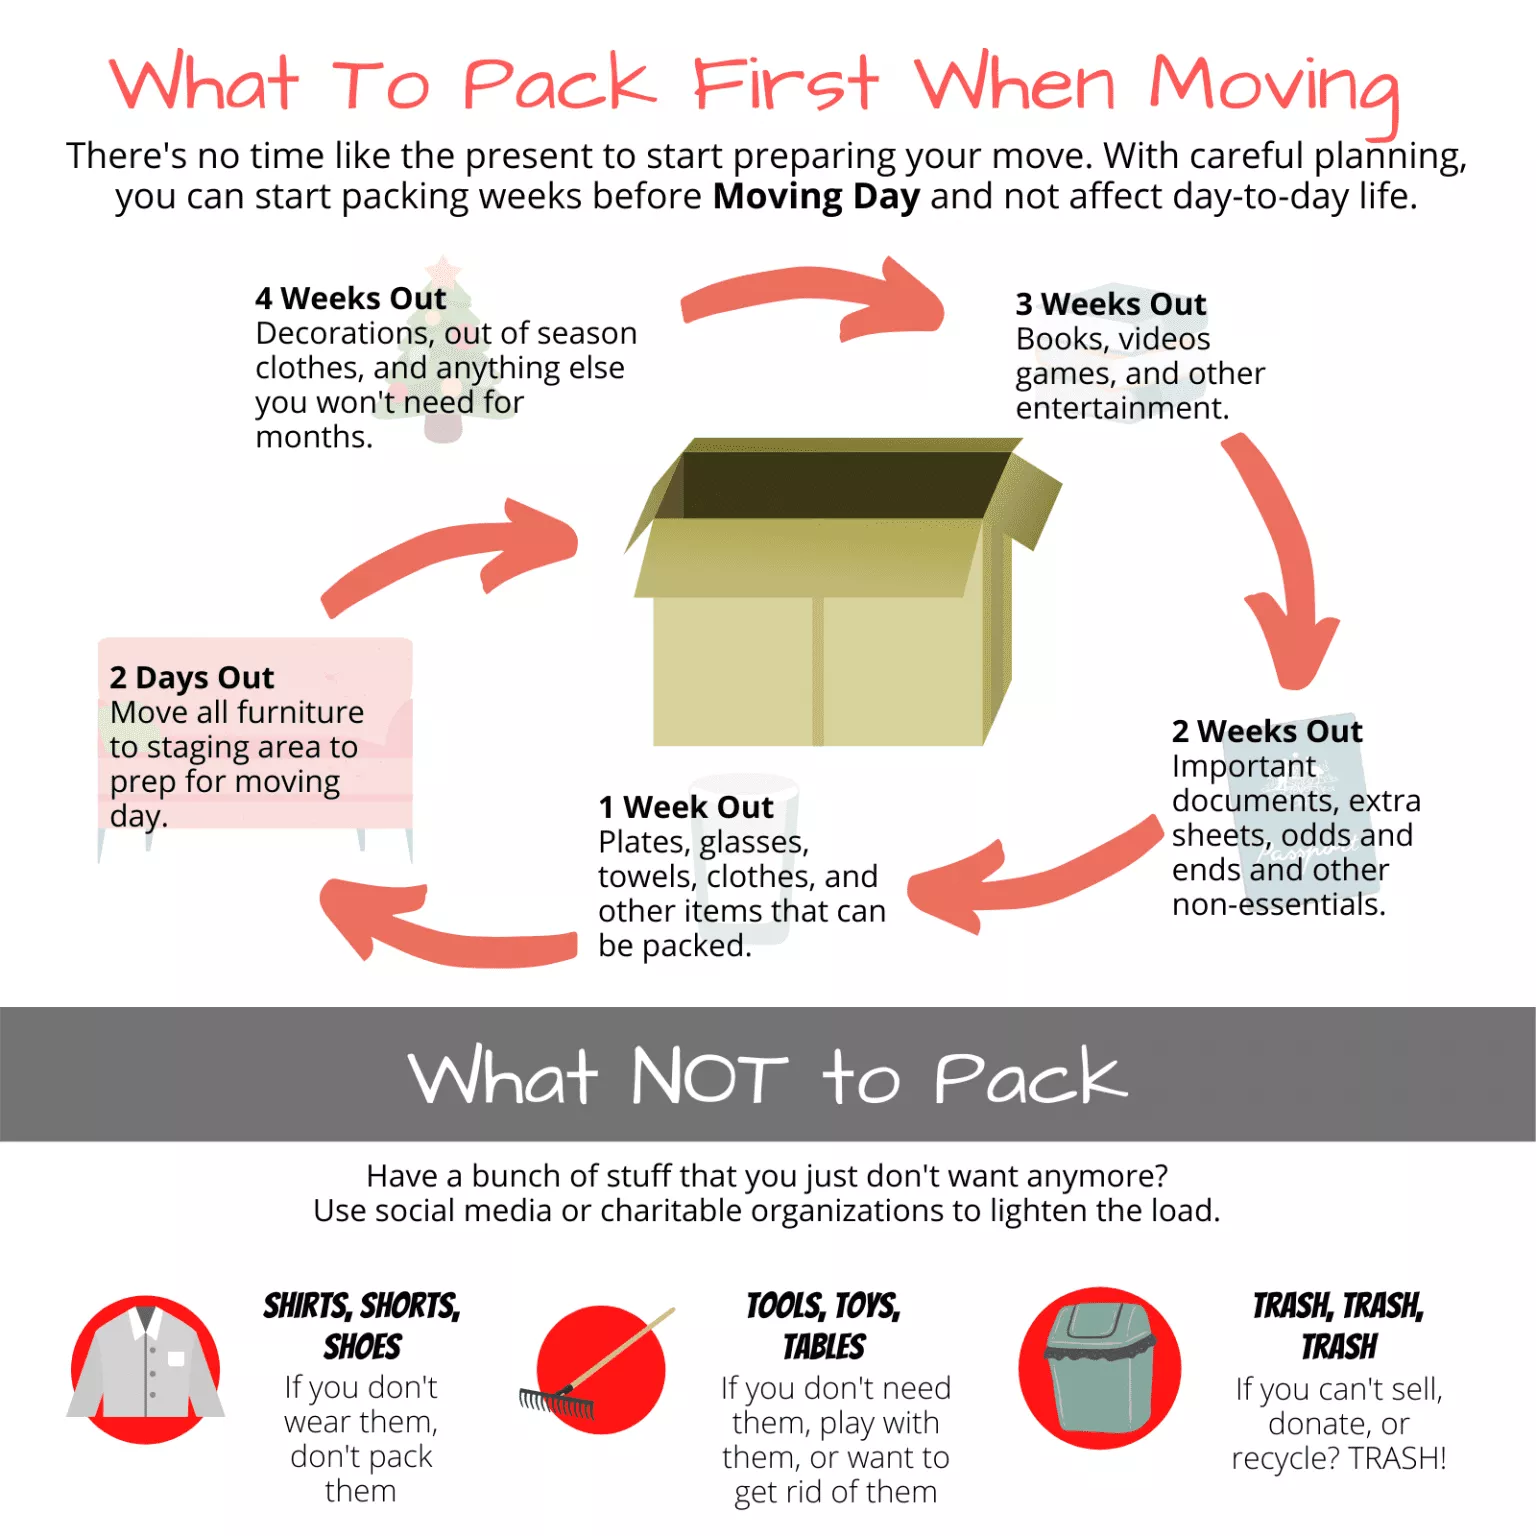 what-to-pack-first-when-moving-2-1536x1536